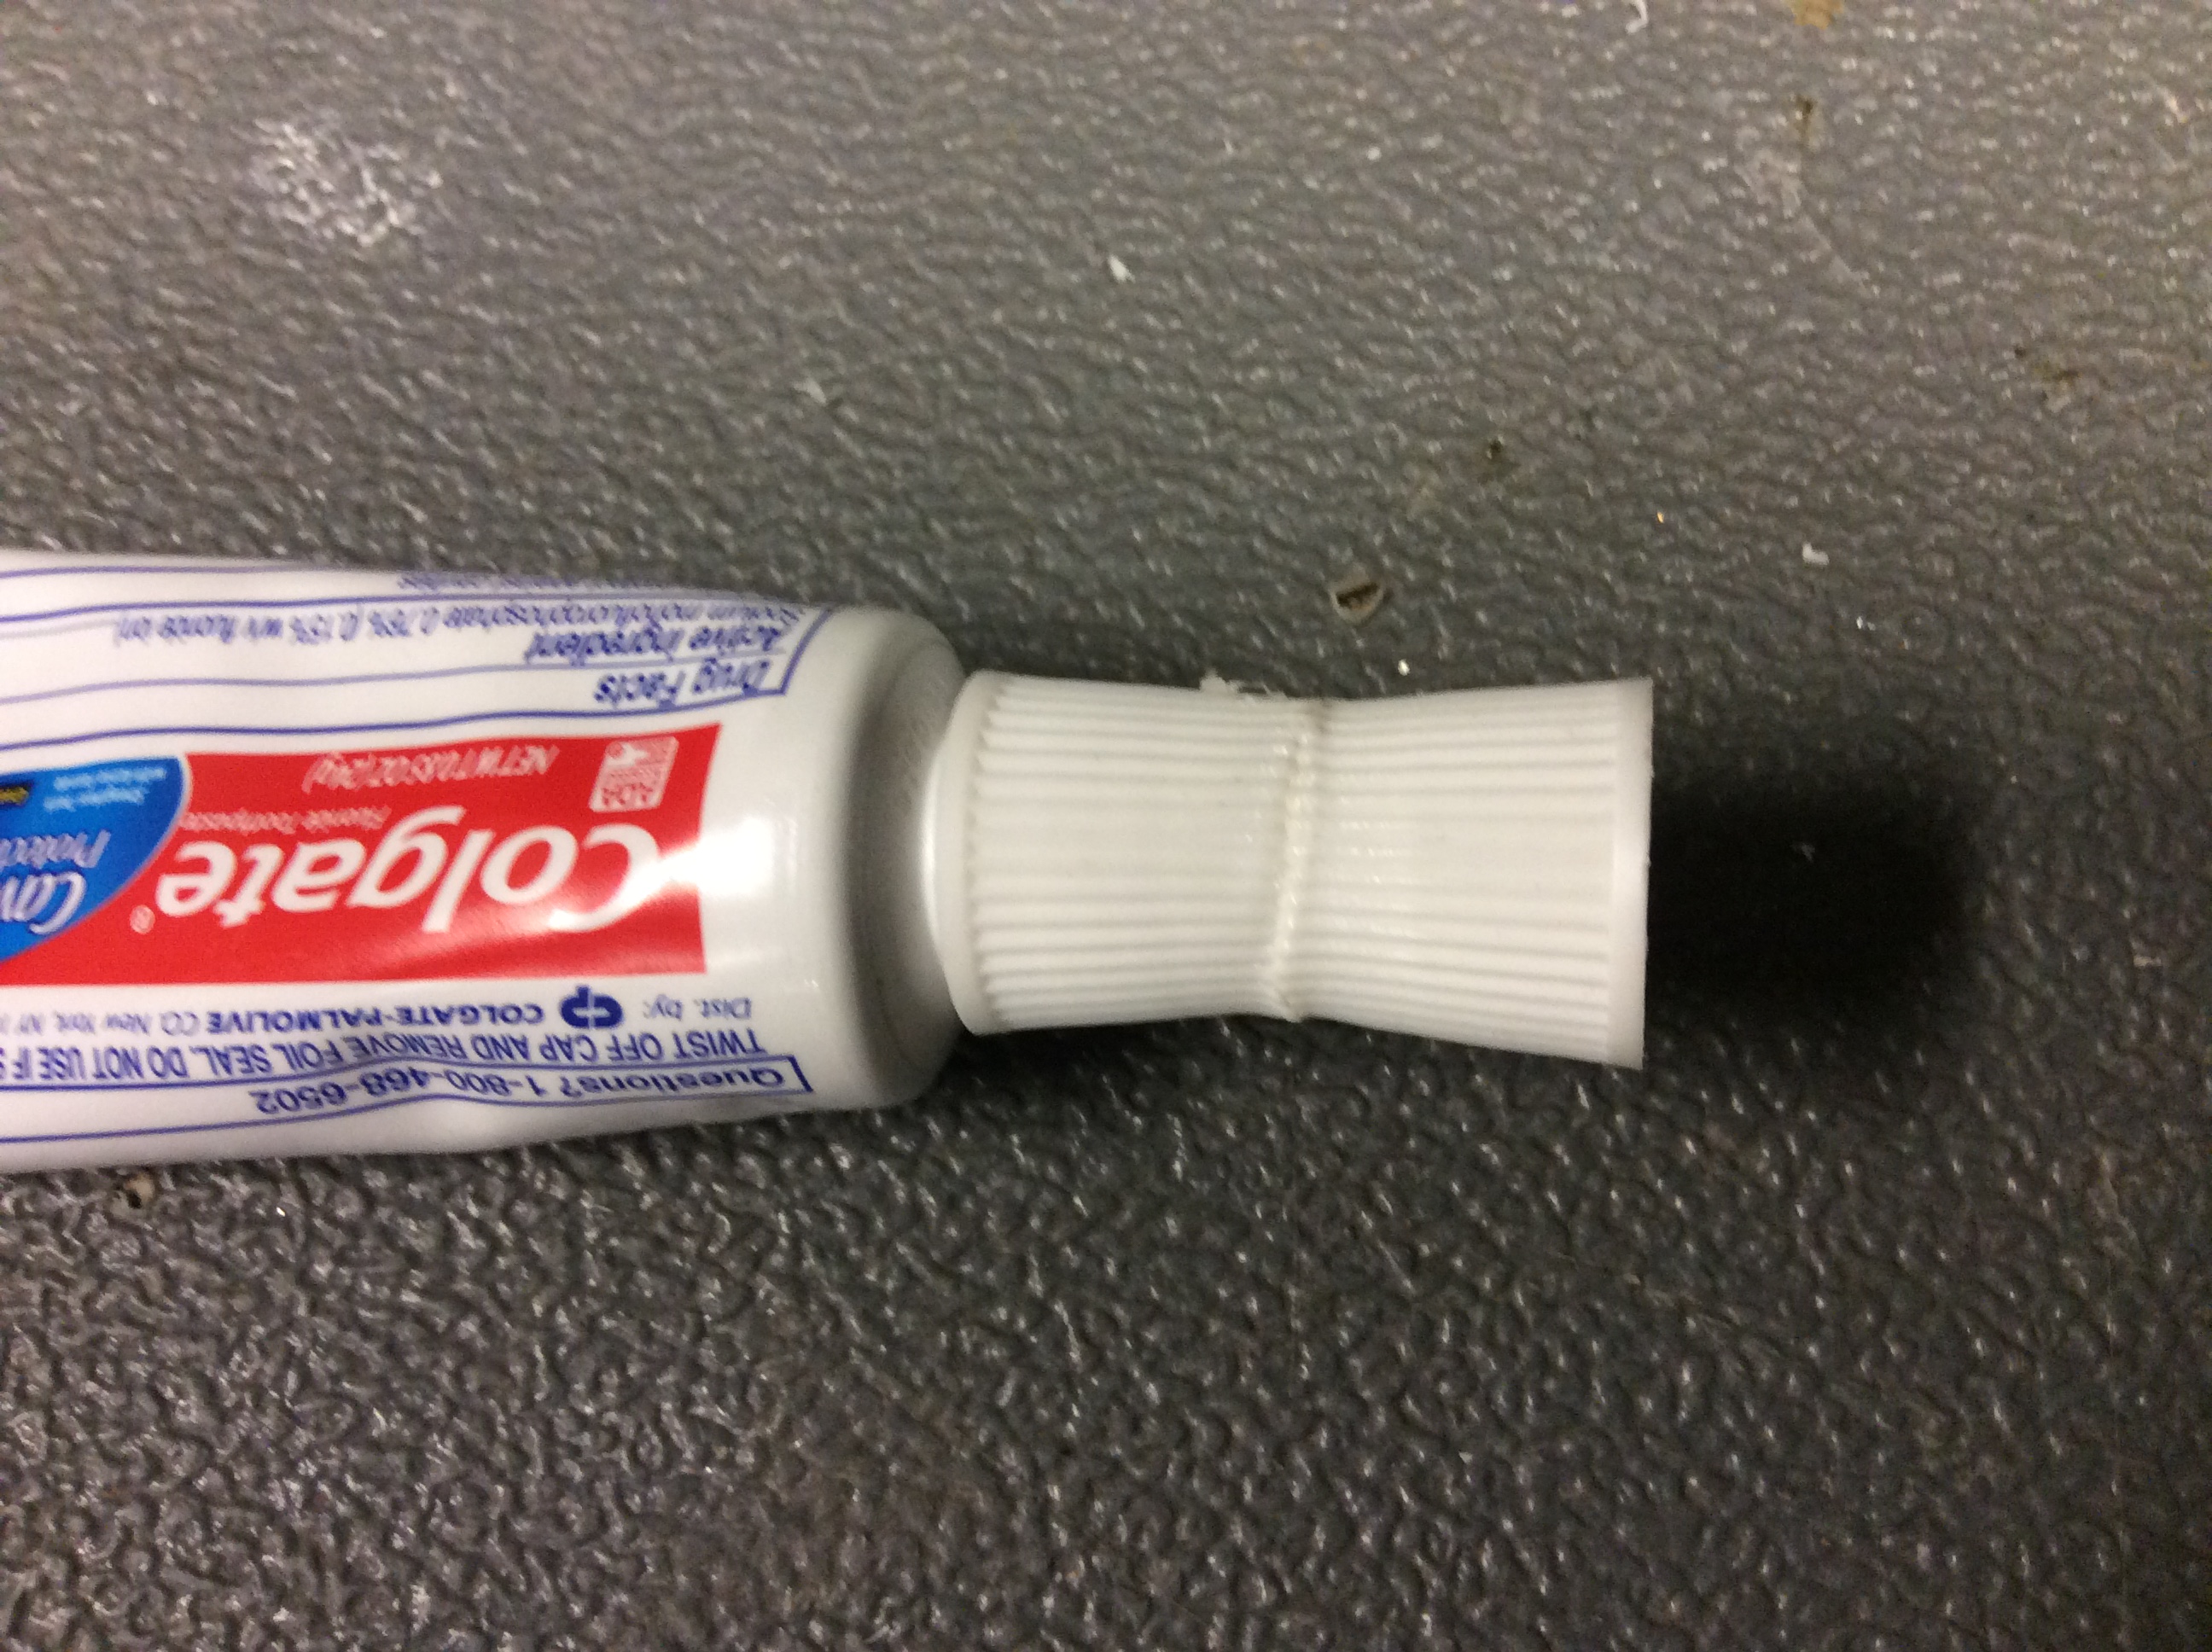 08 - Test fit both ends on tube of toothpaste.JPG